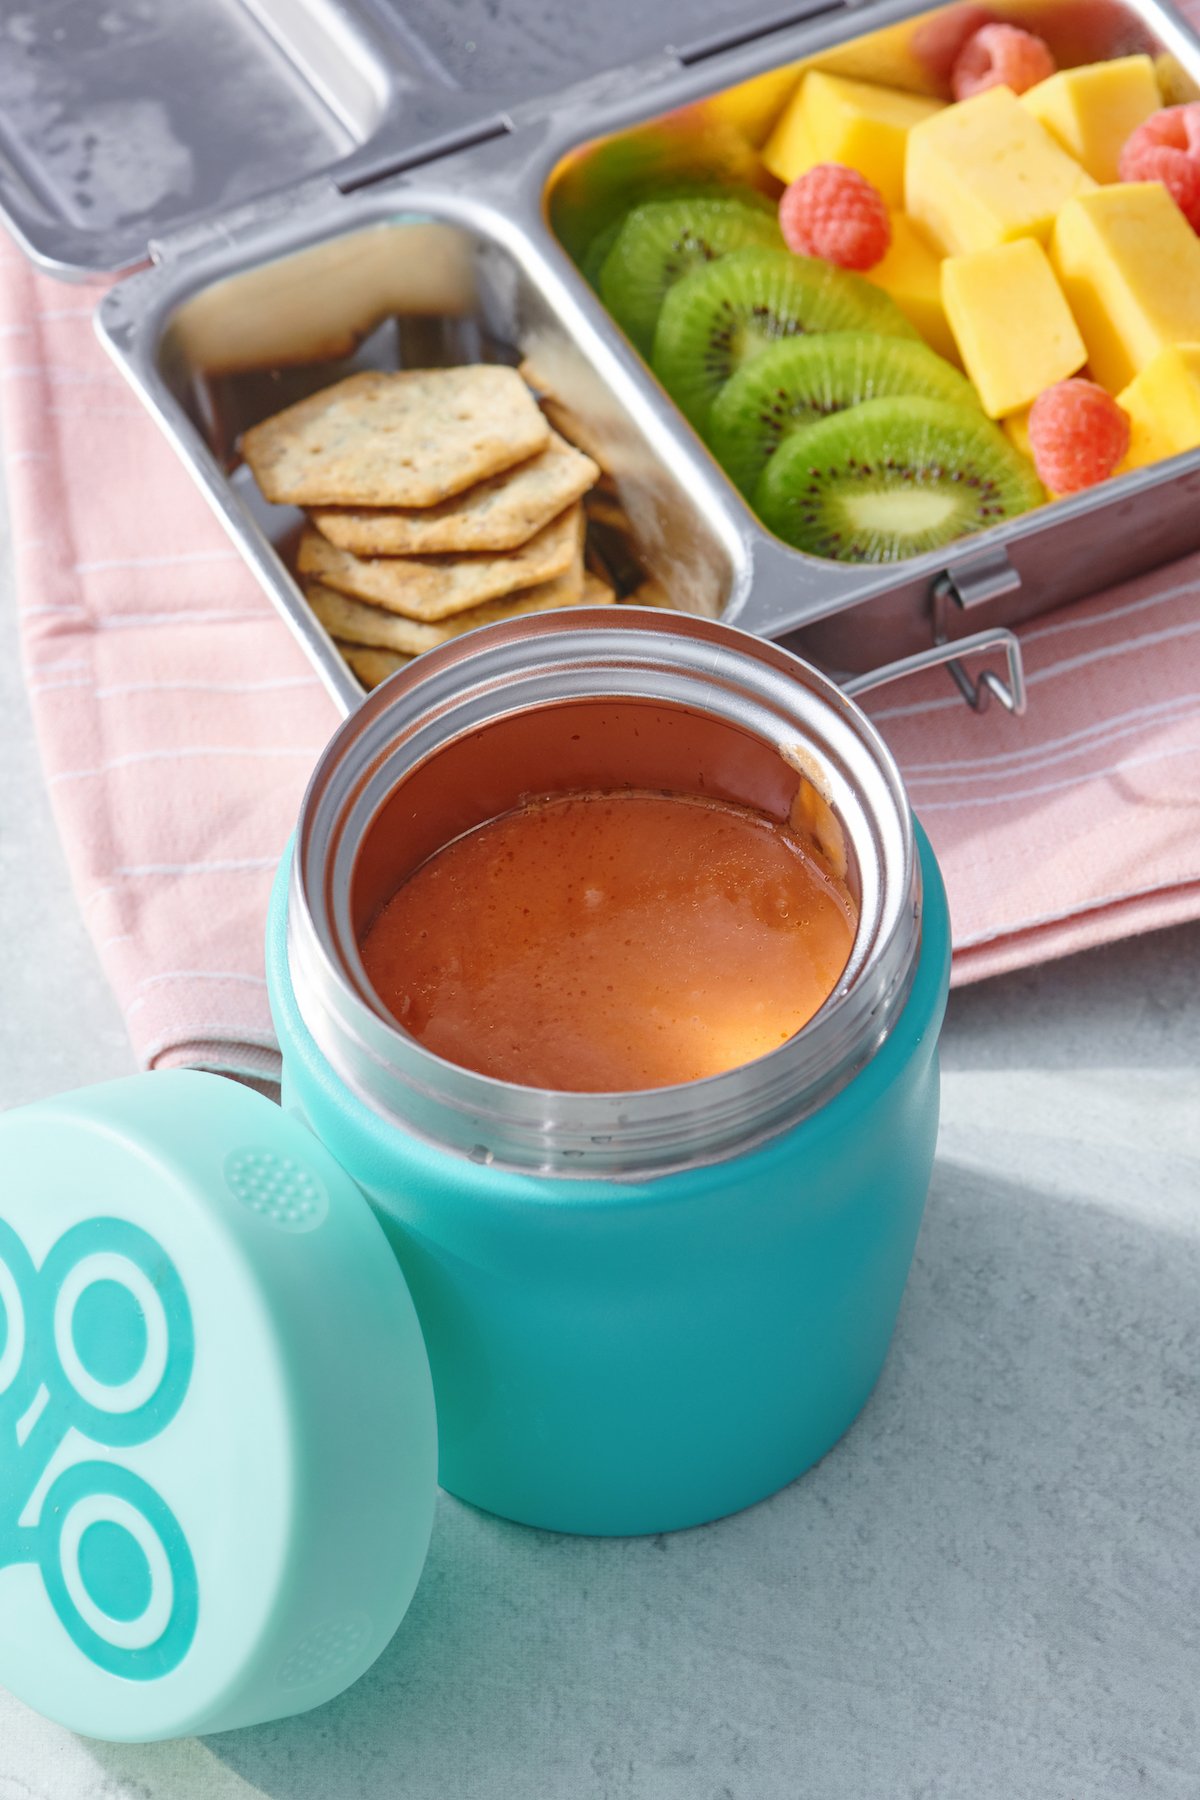 Thermos of soup in front of lunchbox with fresh fruit and crackers